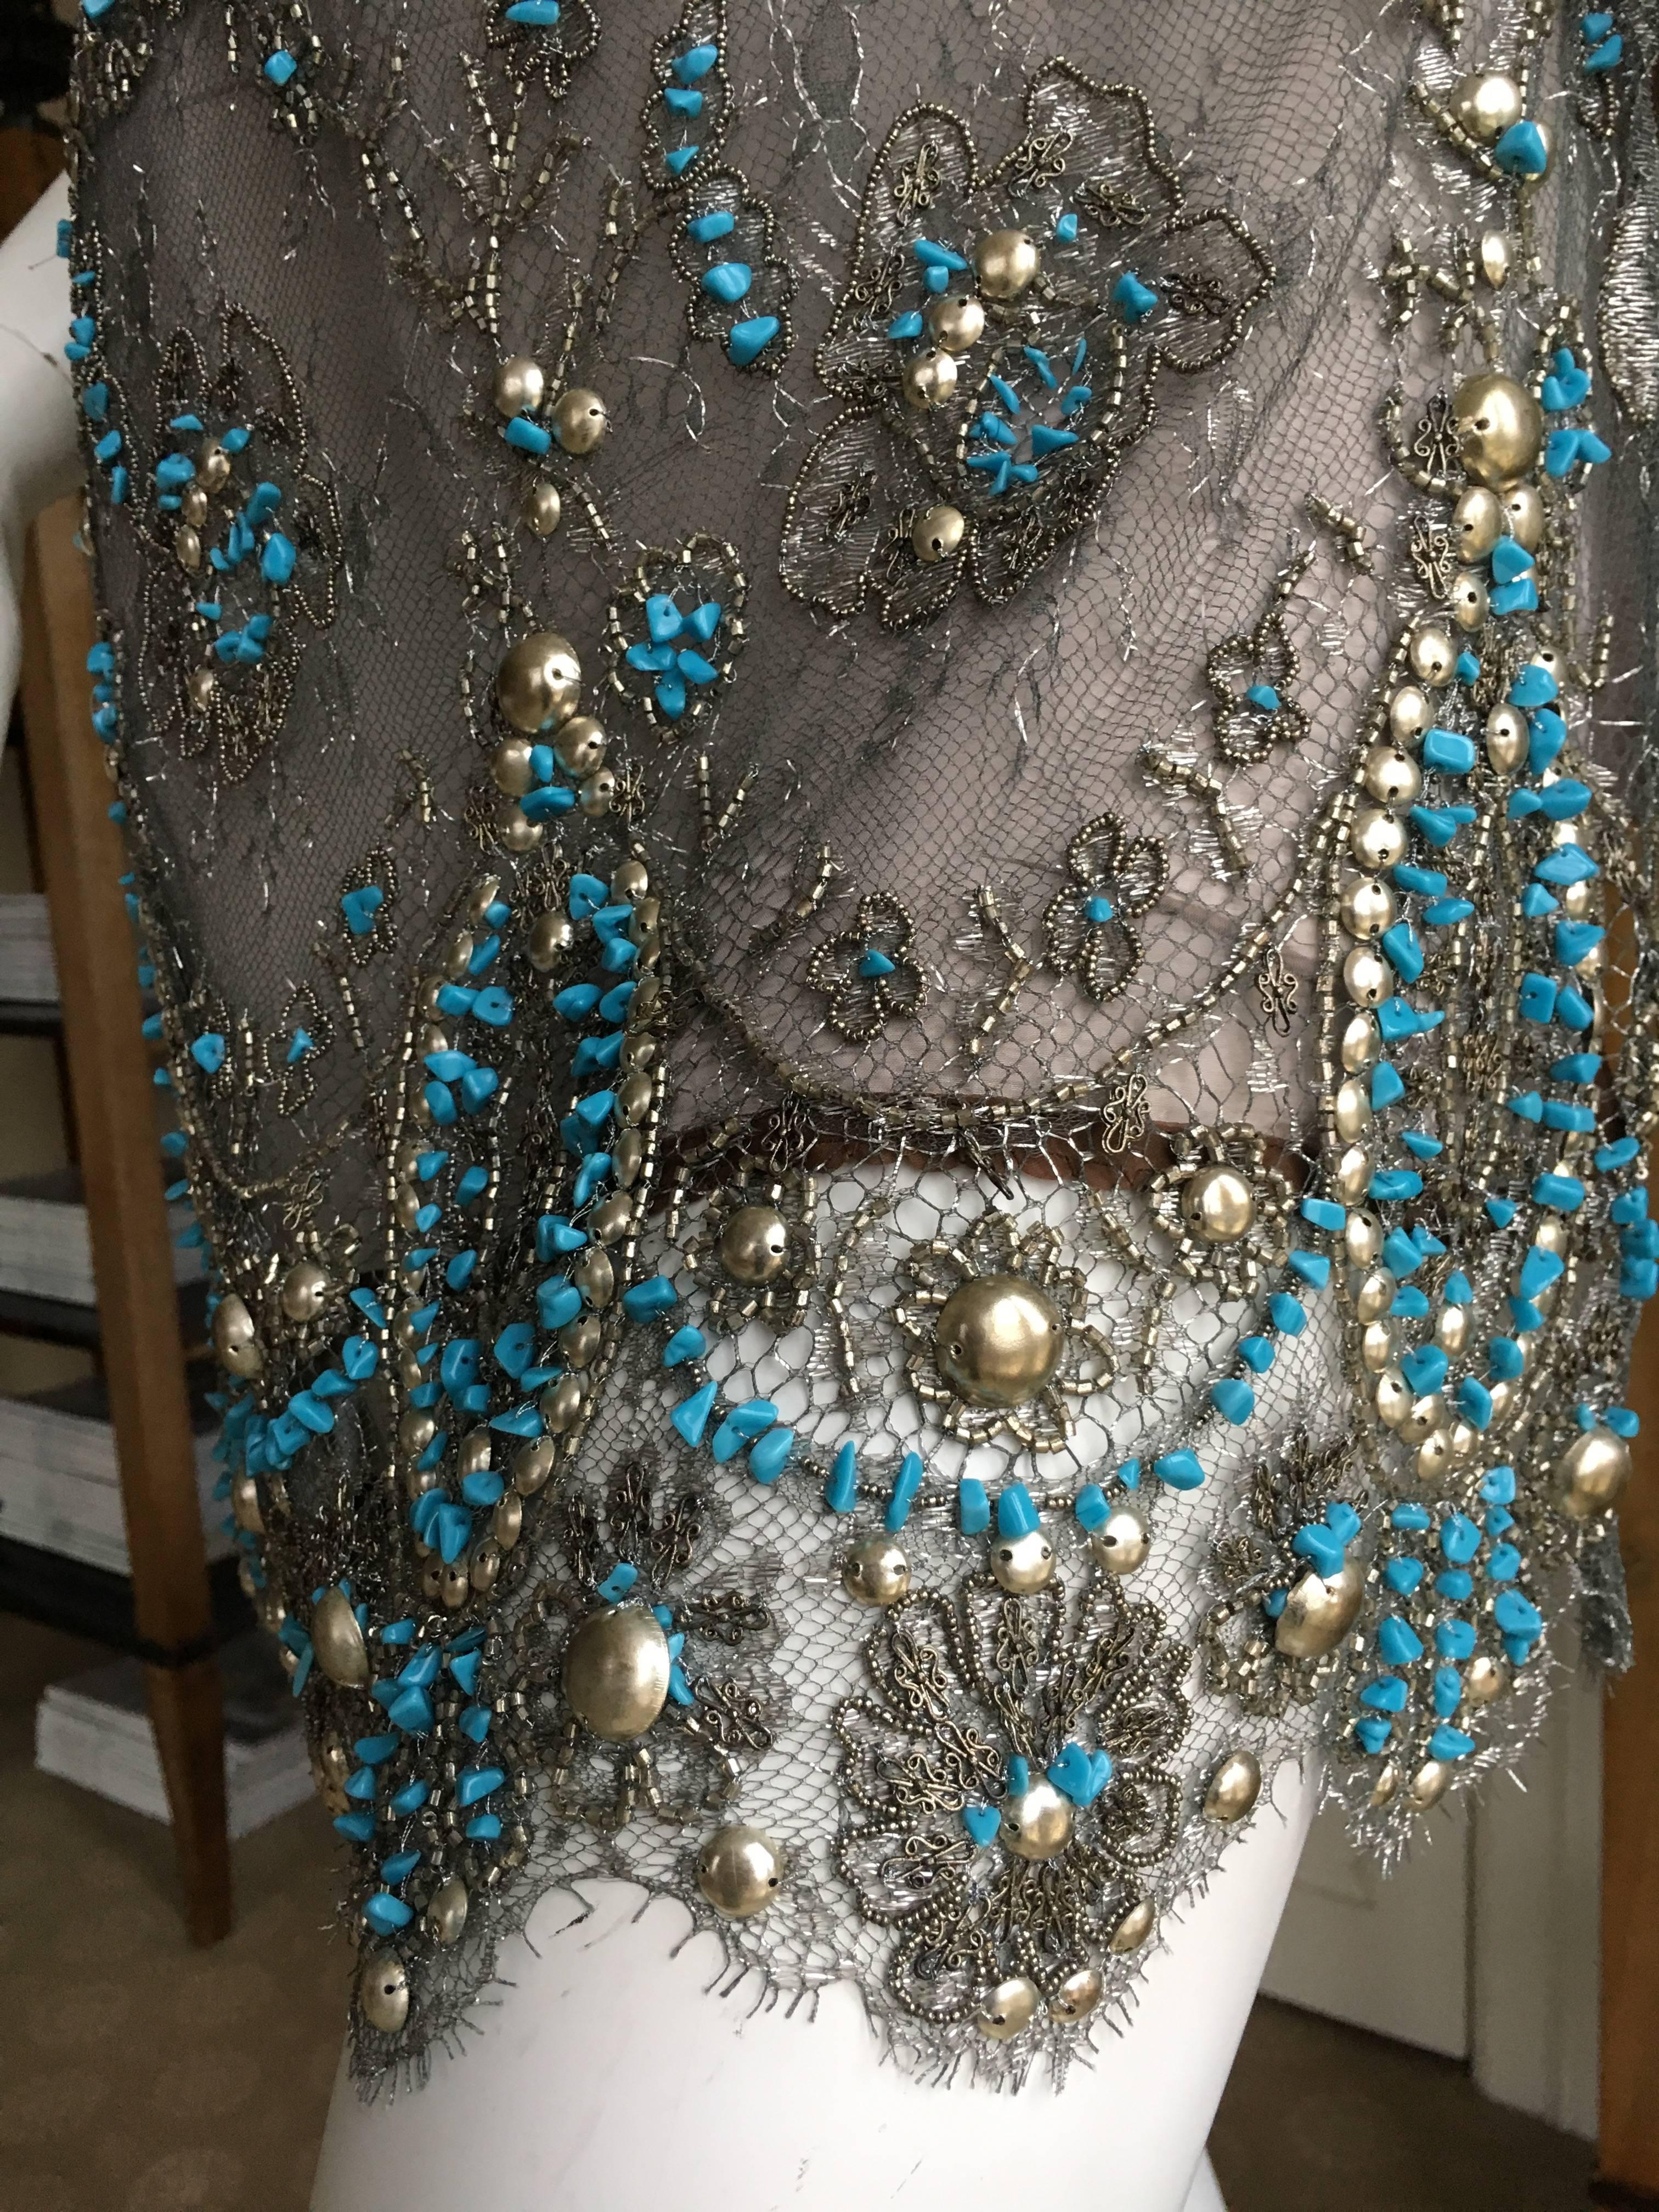 Gianfranco Ferre Silver Lace Tunic with Couture Quality Turquoise Embellishment For Sale 3